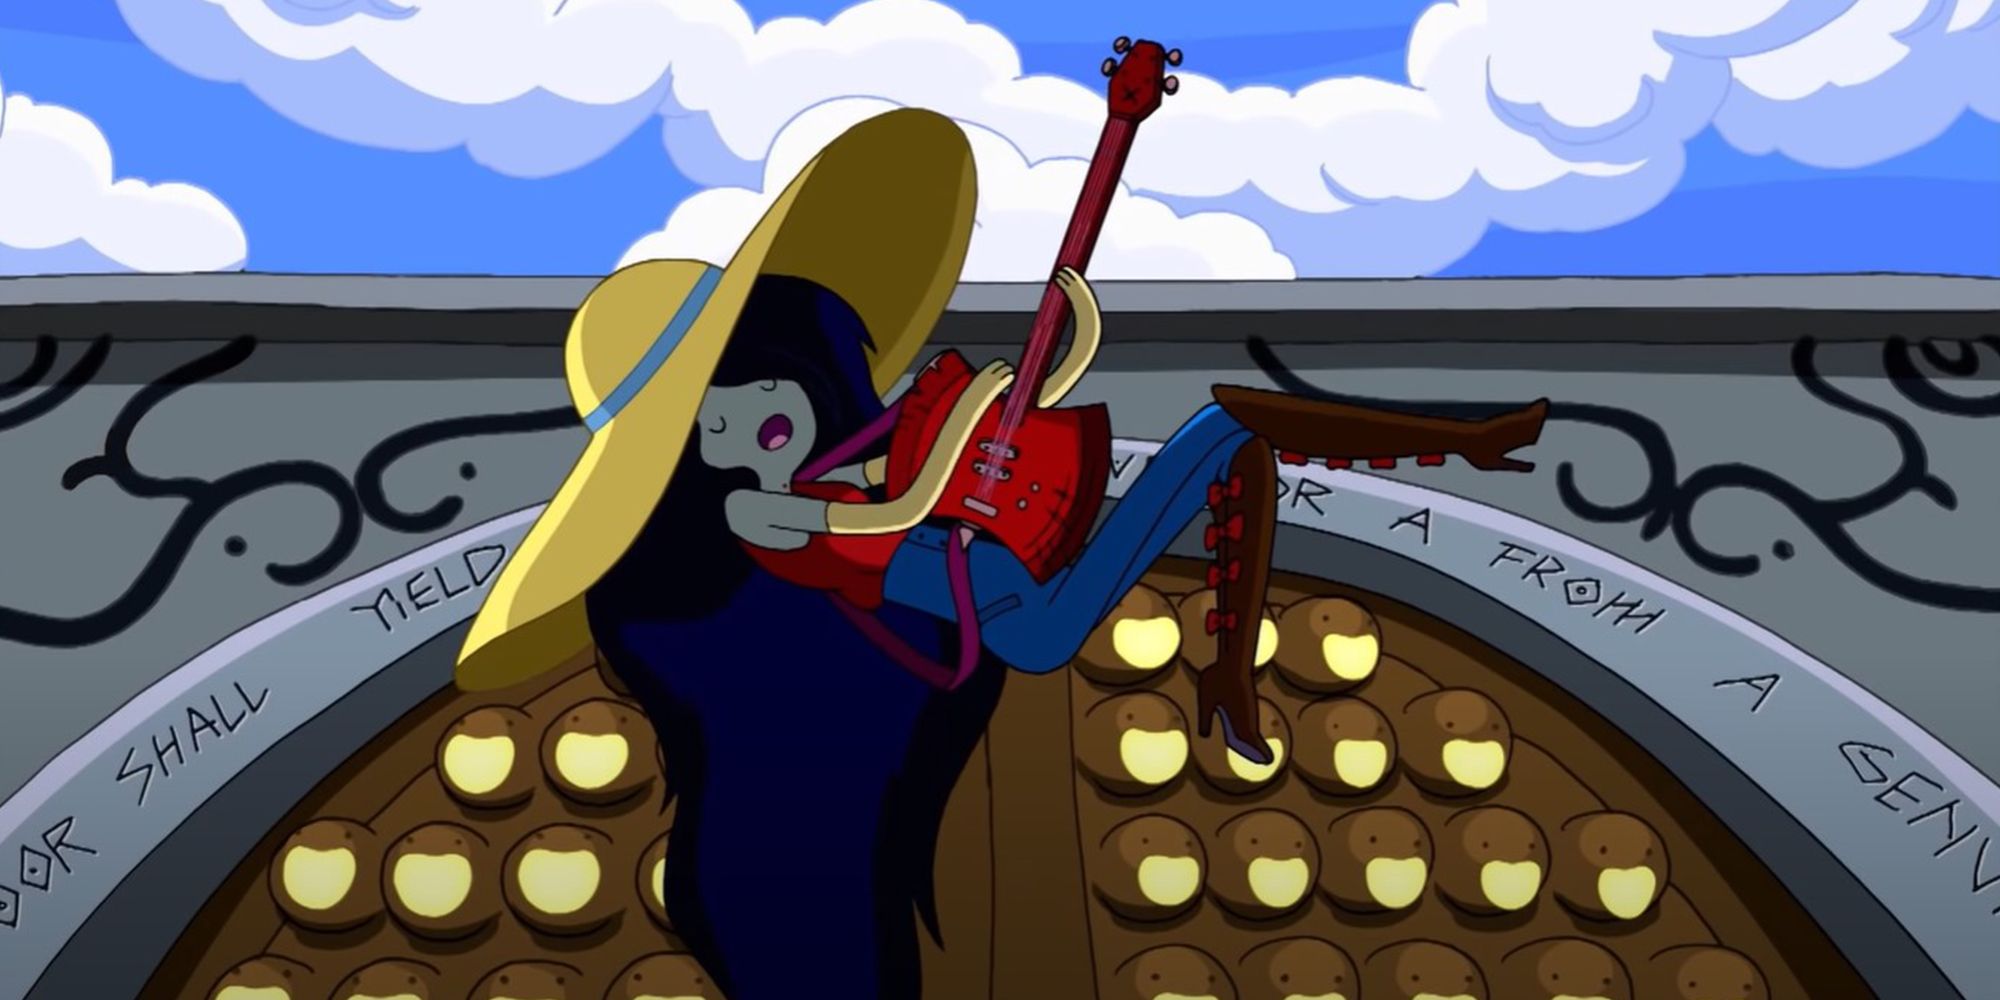 Marceline singing a song in What Was Missing